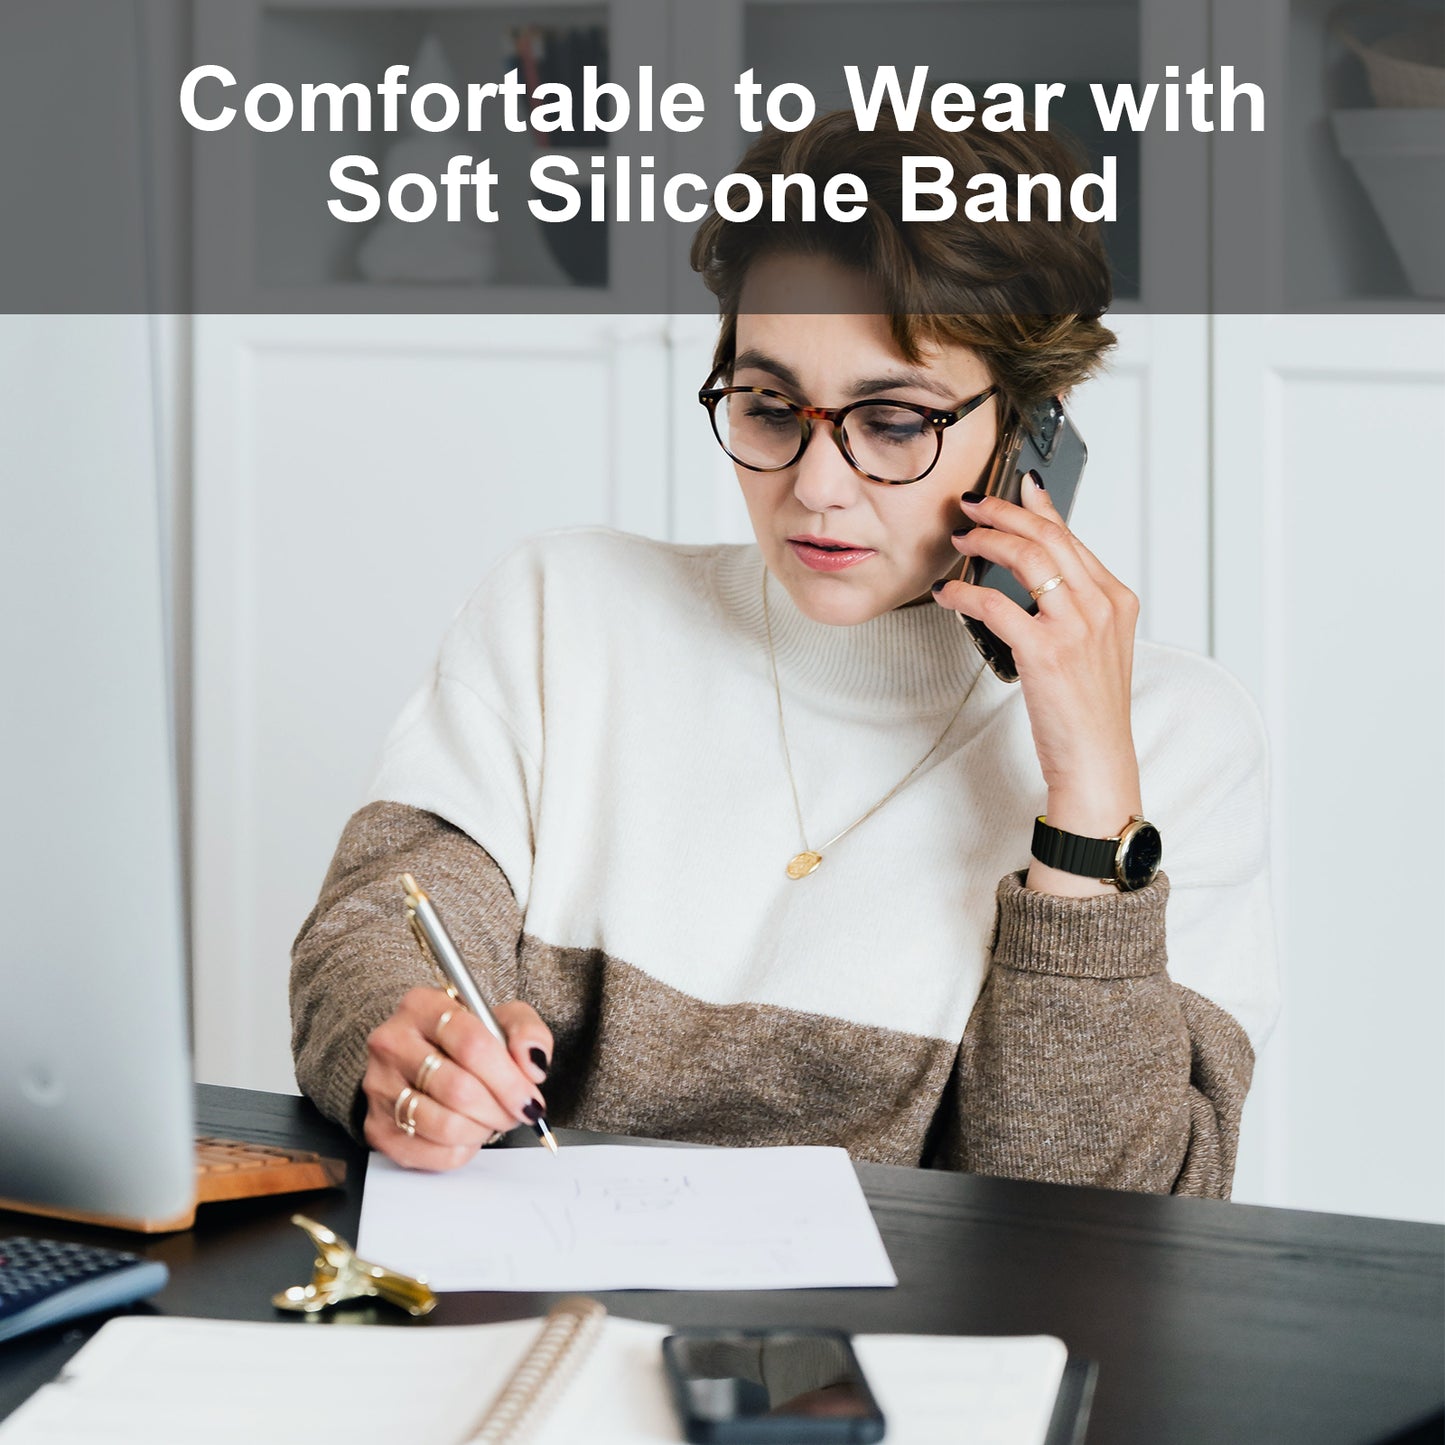 Comfortable to Wear with Soft Silicone Band